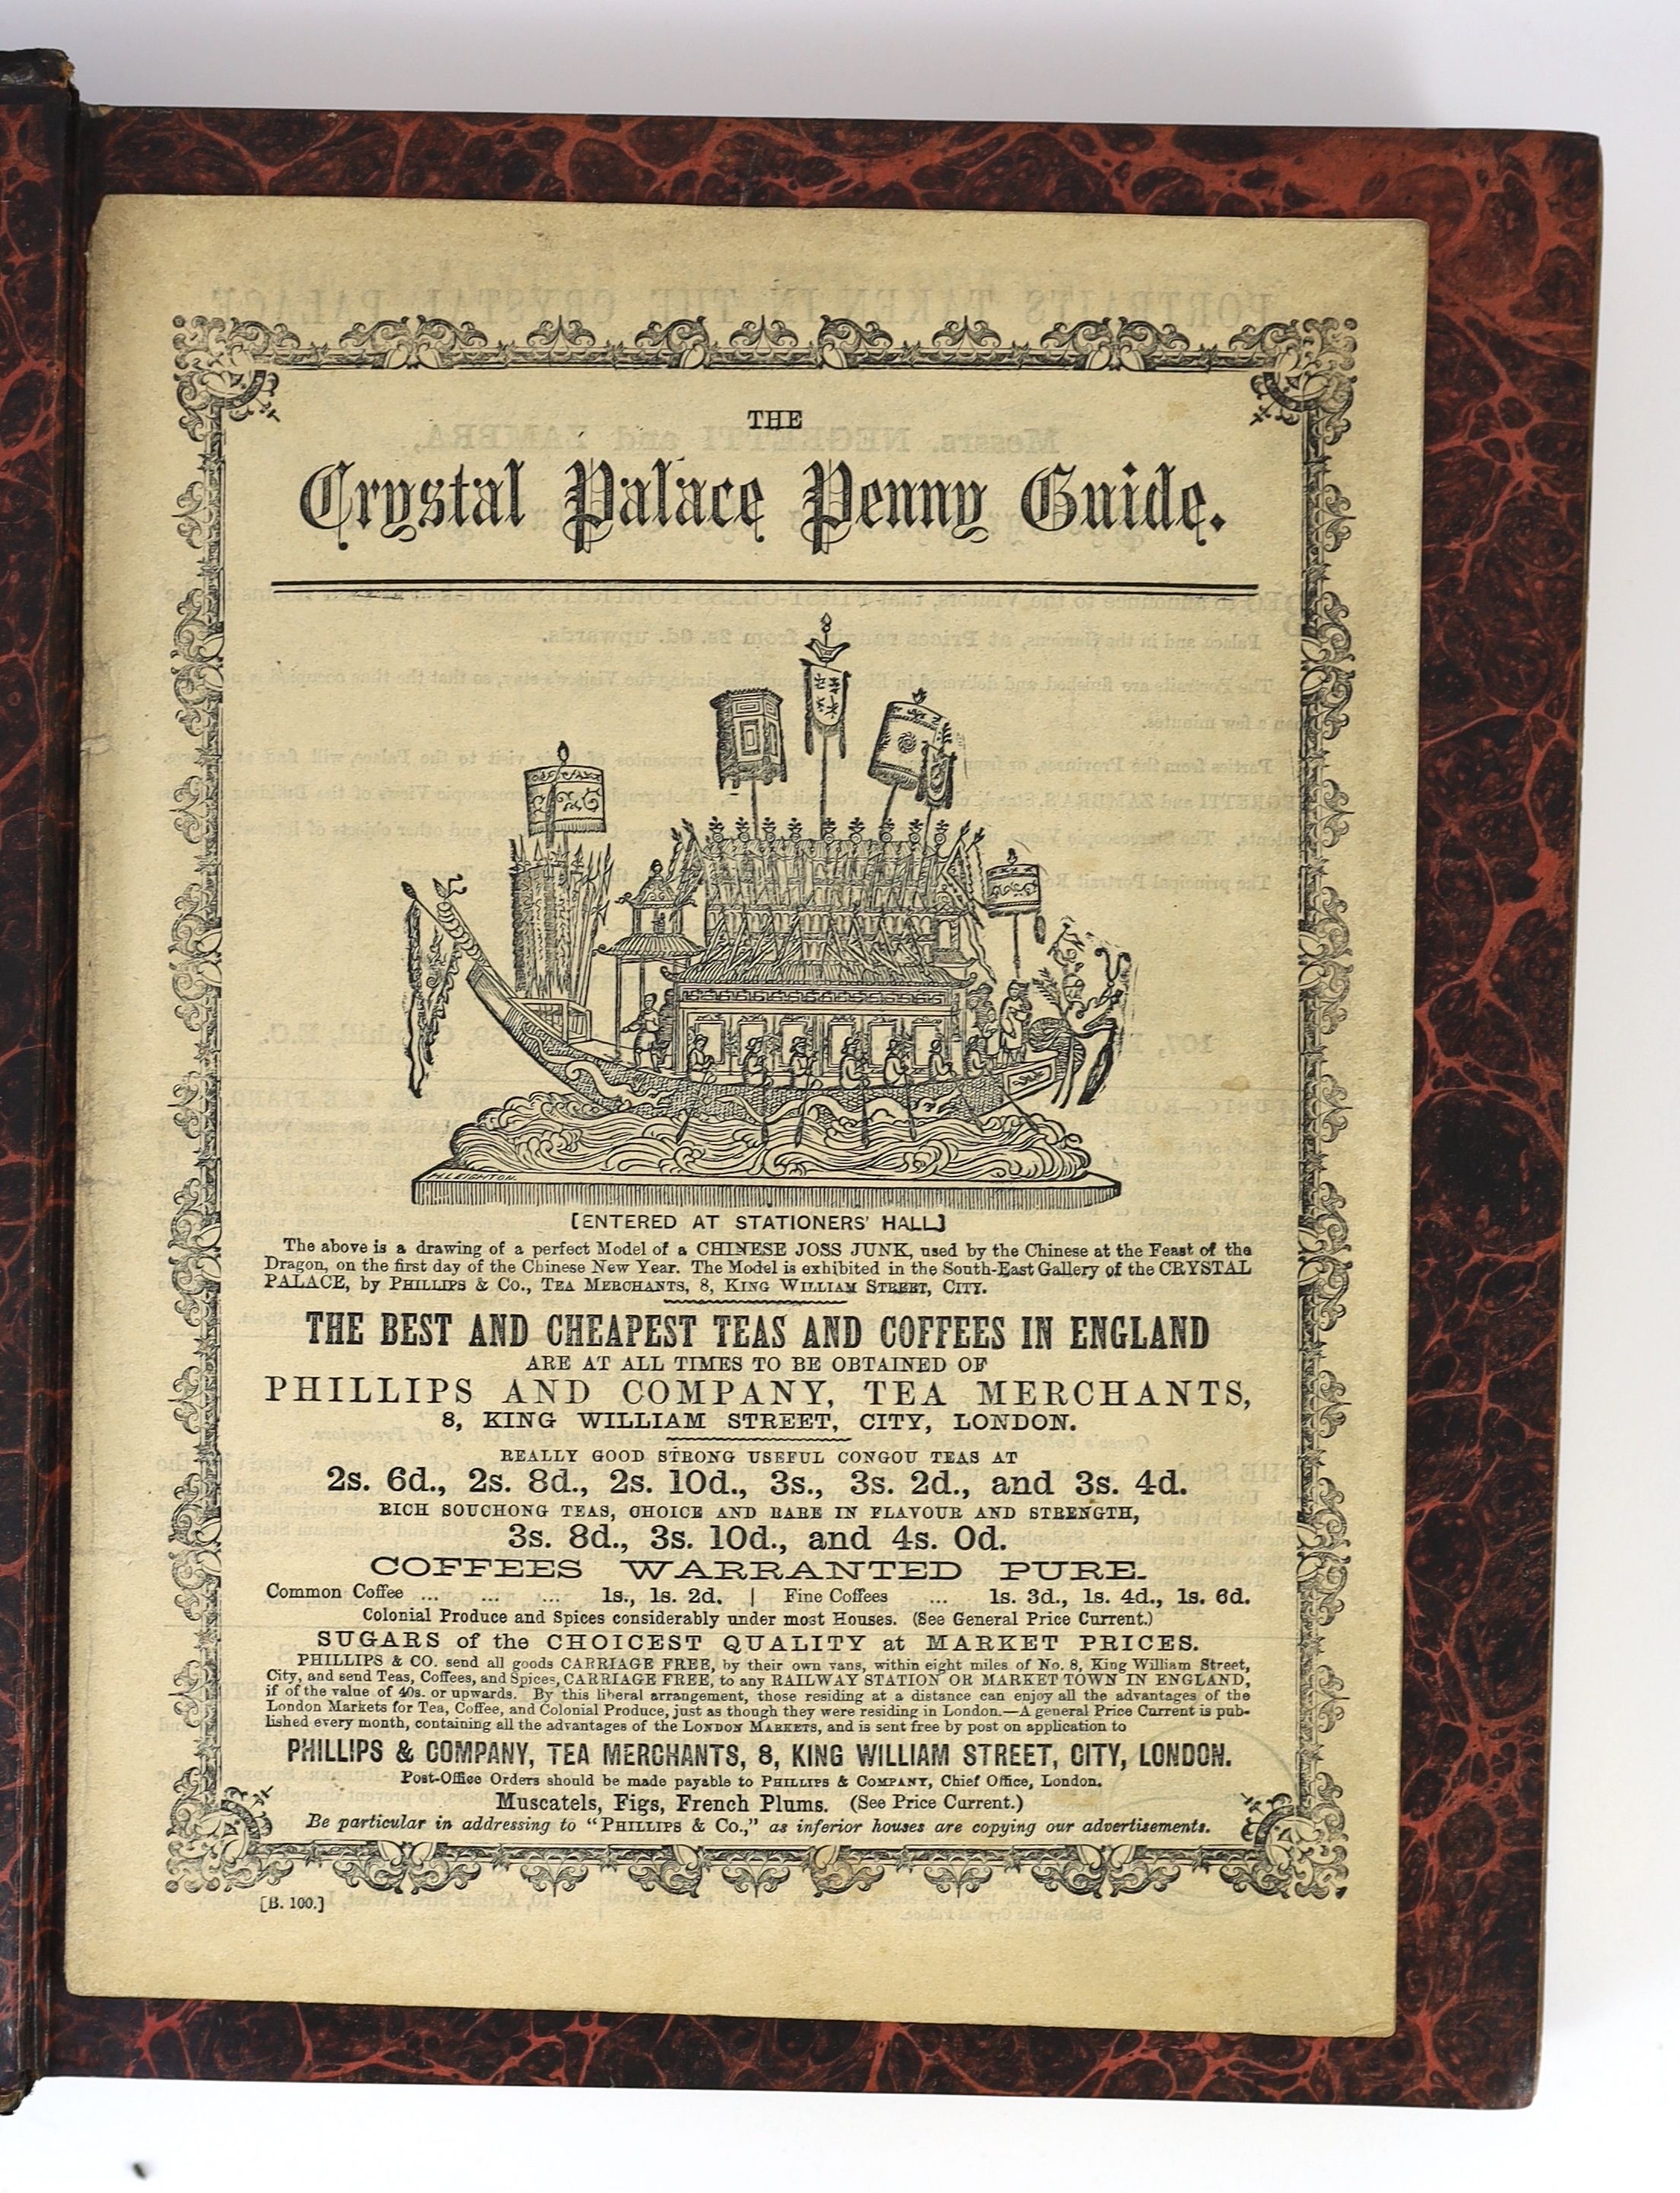 Tallis, John & Co., - History and Description of the Crystal Palace, 3 vols in 2, morocco gilt by John Waterer, tear to frontis repaired, London, [1851-54], together with, ‘’The Crystal Palace Penny Guide’’, 4to, 10pp.